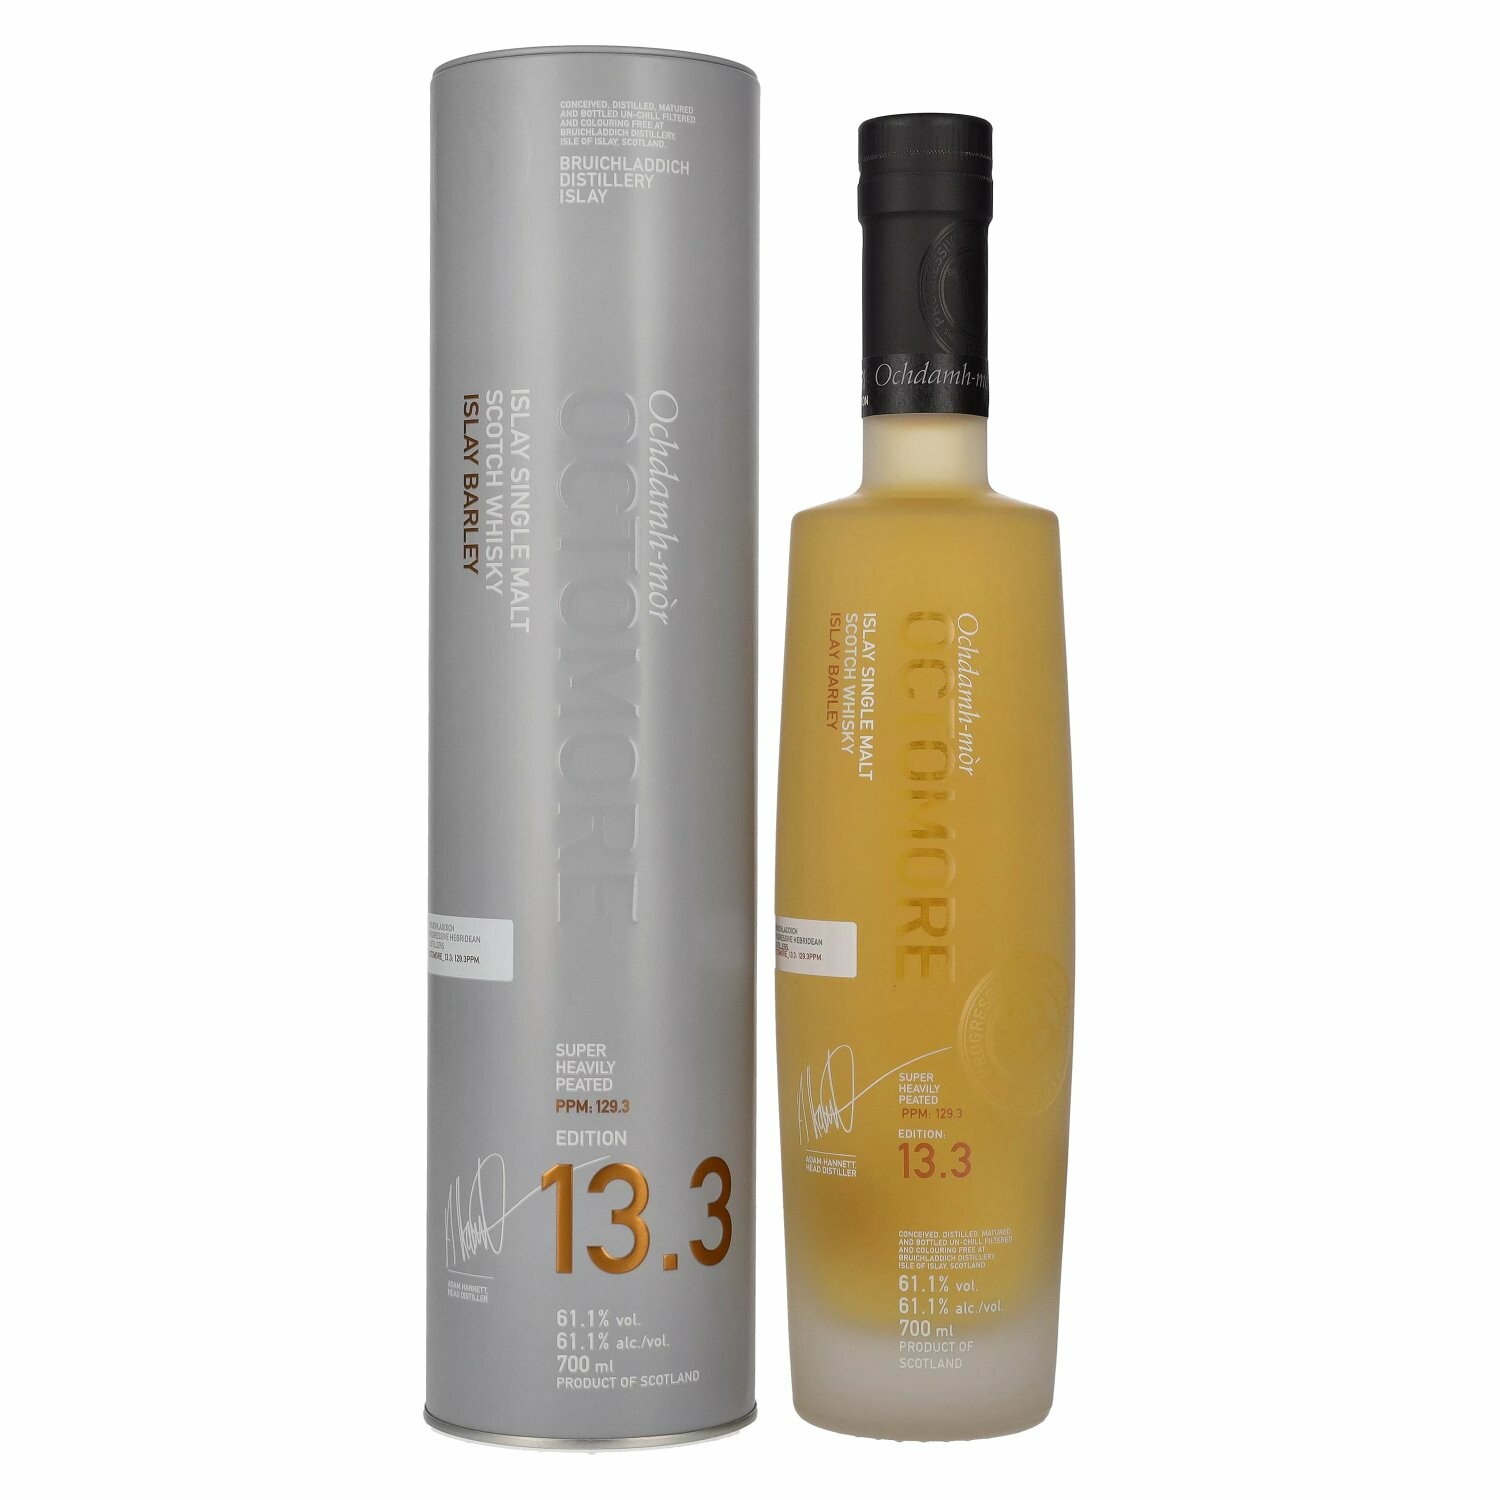 Octomore EDITION: 13.3 Super Heavily Peated Islay Barley 2022 61,1% Vol. 0,7l in Tinbox